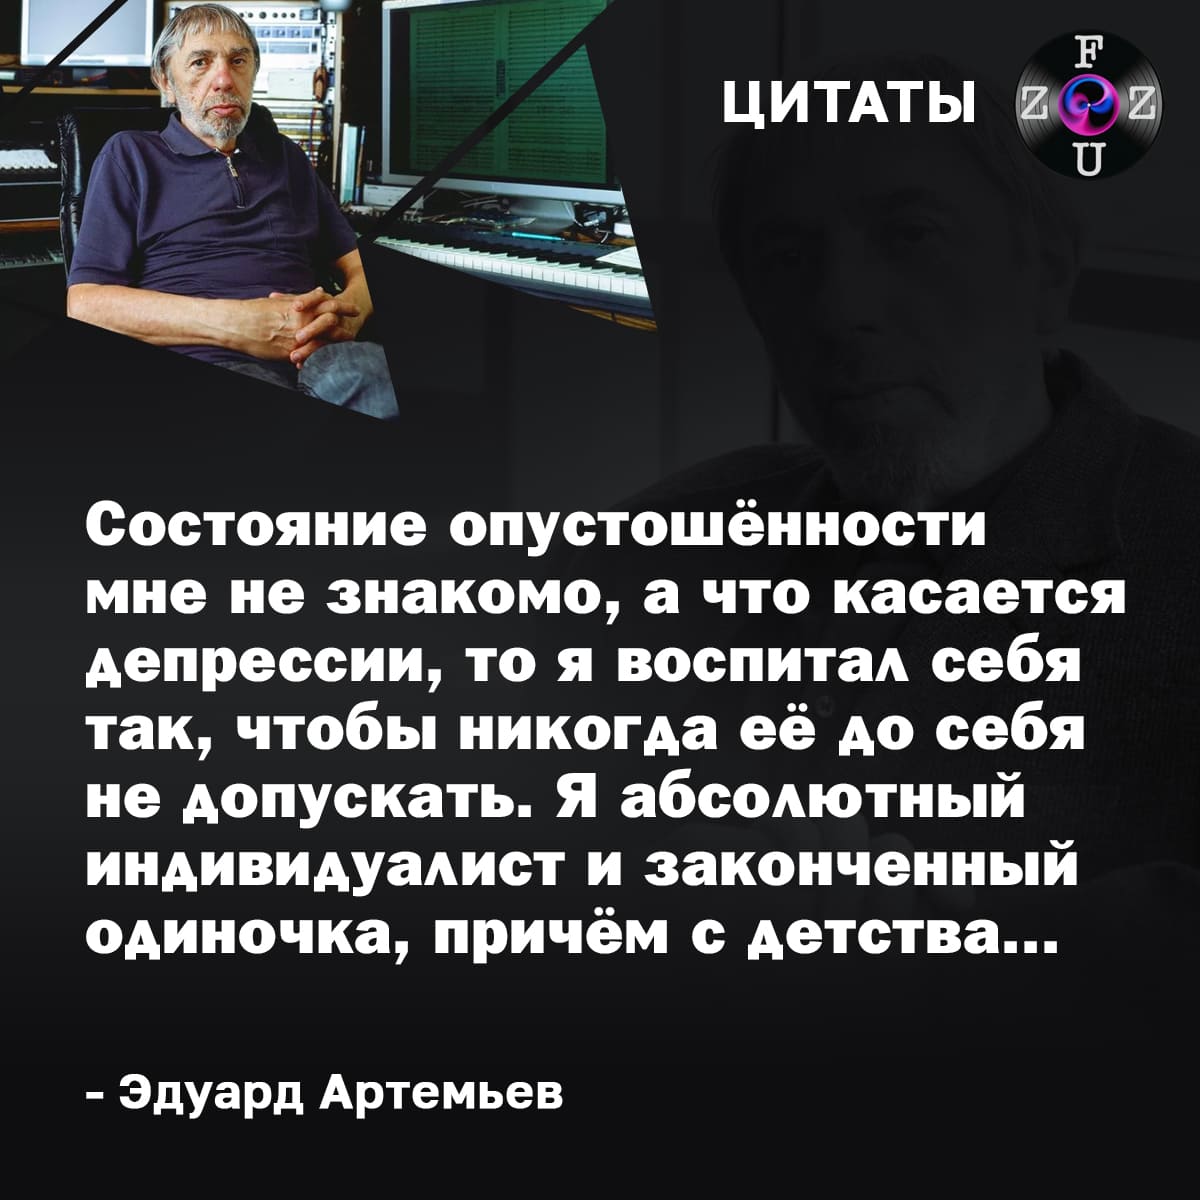 Quotes by Eduard Artemyev